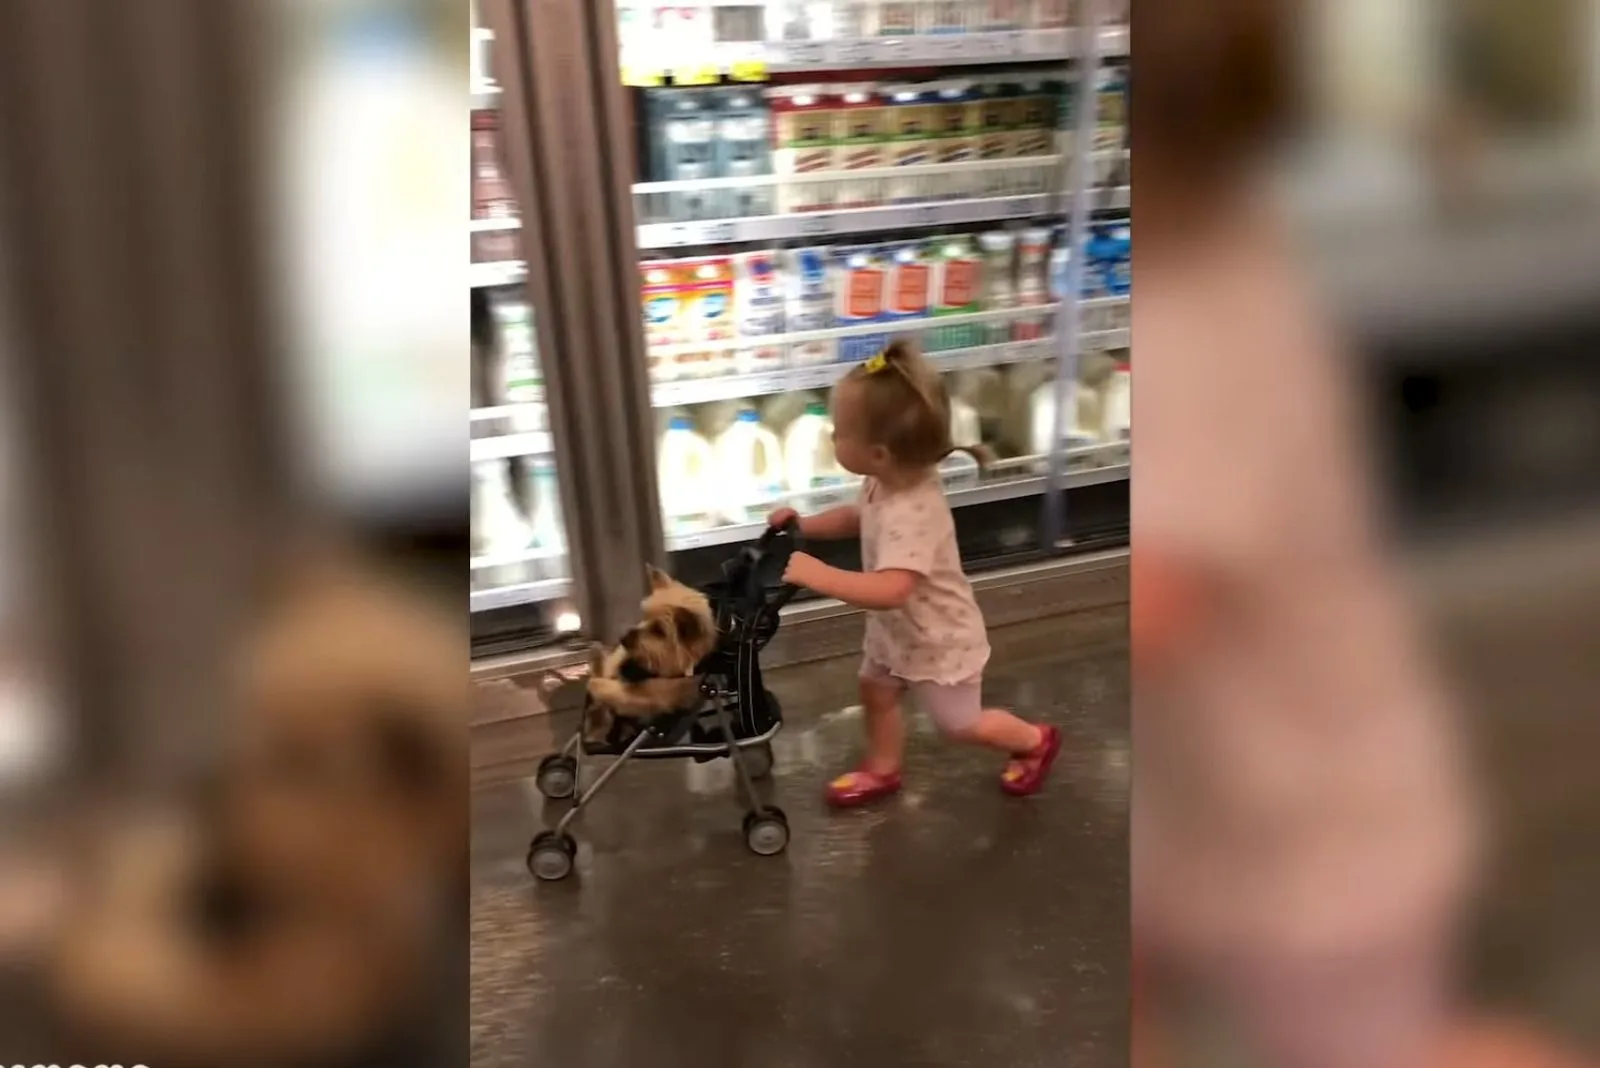 dog and child in supermarket